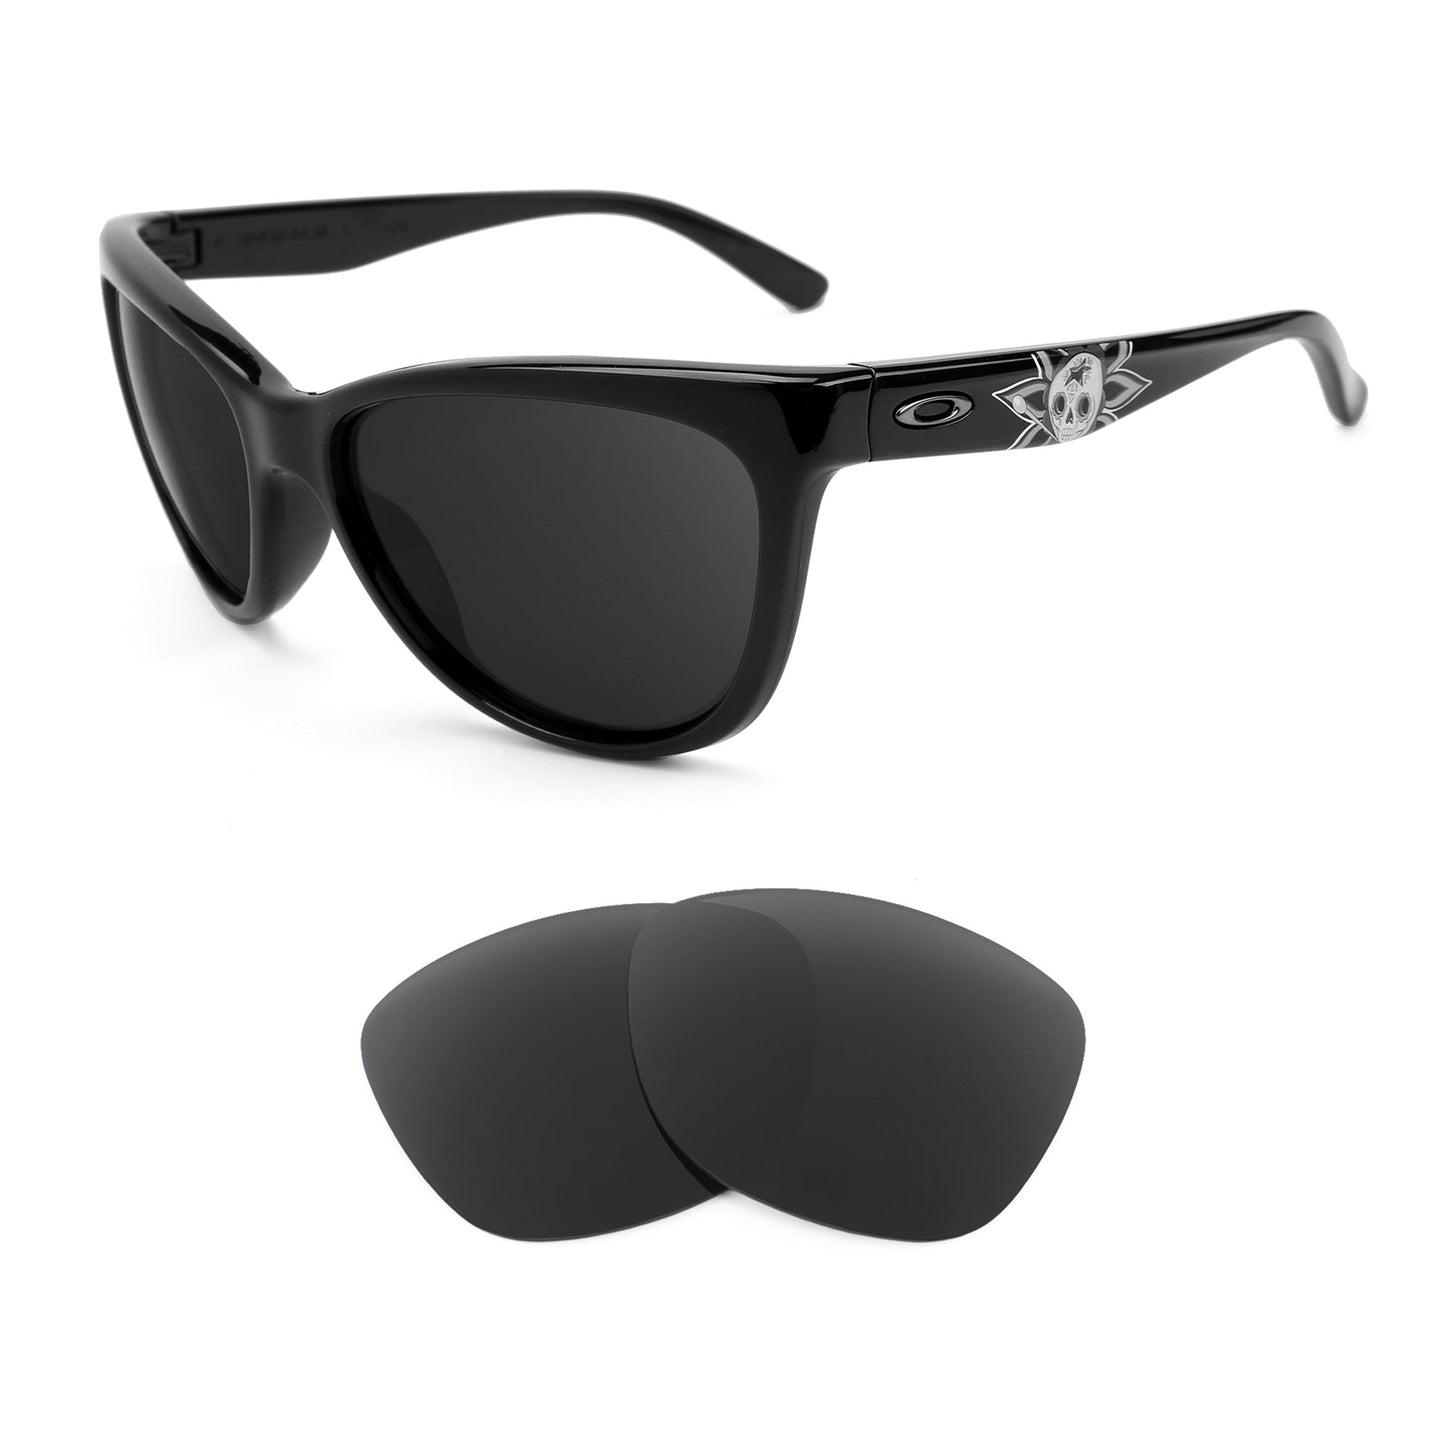 Oakley Fringe sunglasses with replacement lenses